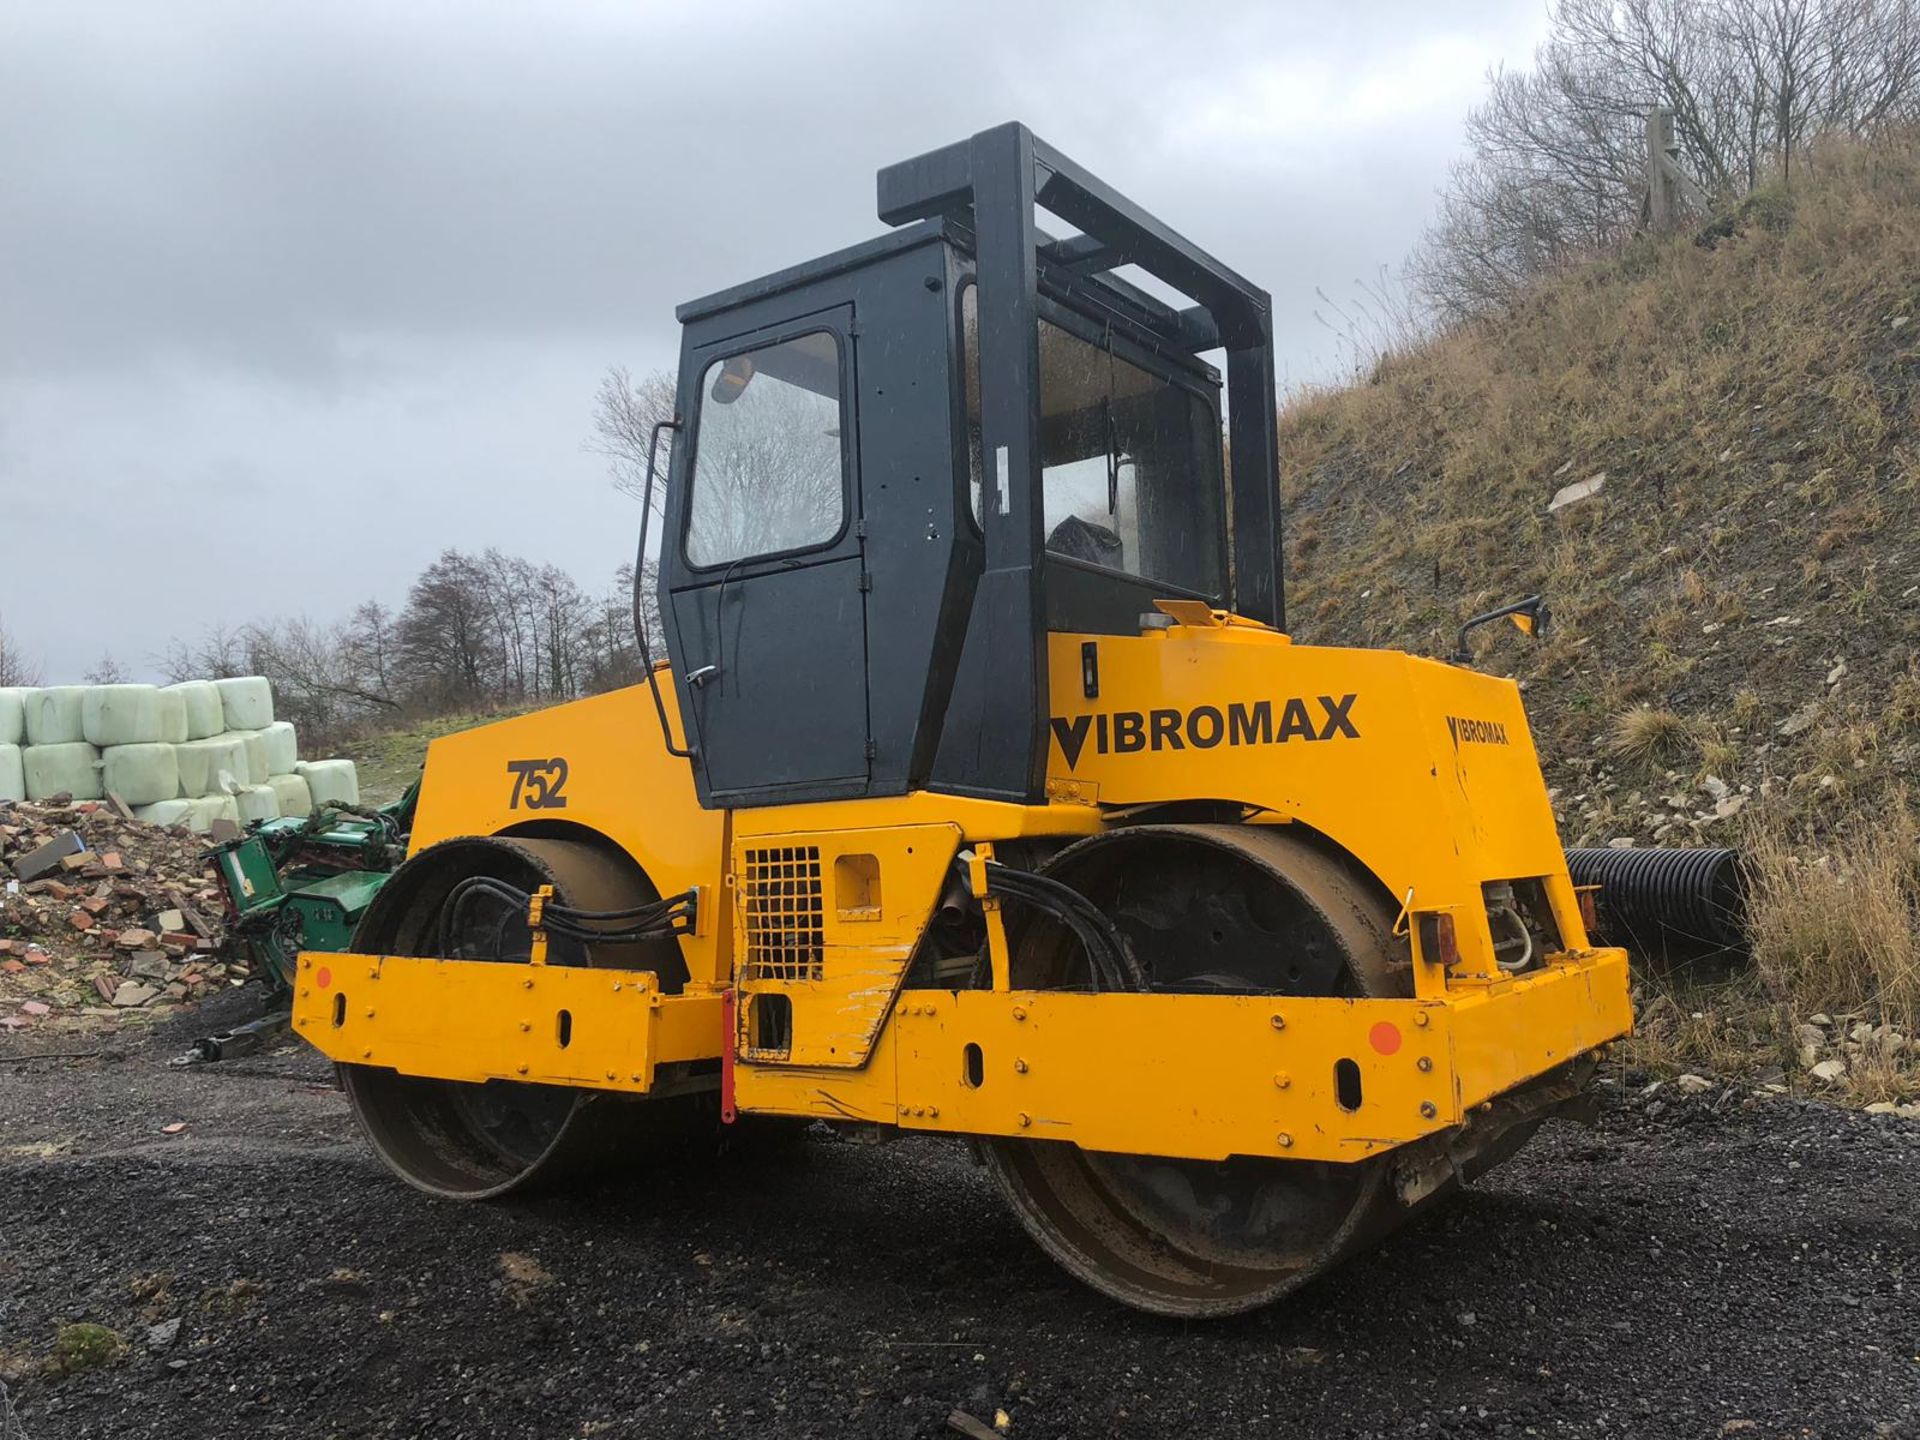 VIBROMAX W752 ROLLER, YEAR UNKNOWN, RUNS WORKS AND VIBRATES *PLUS VAT* - Image 4 of 6